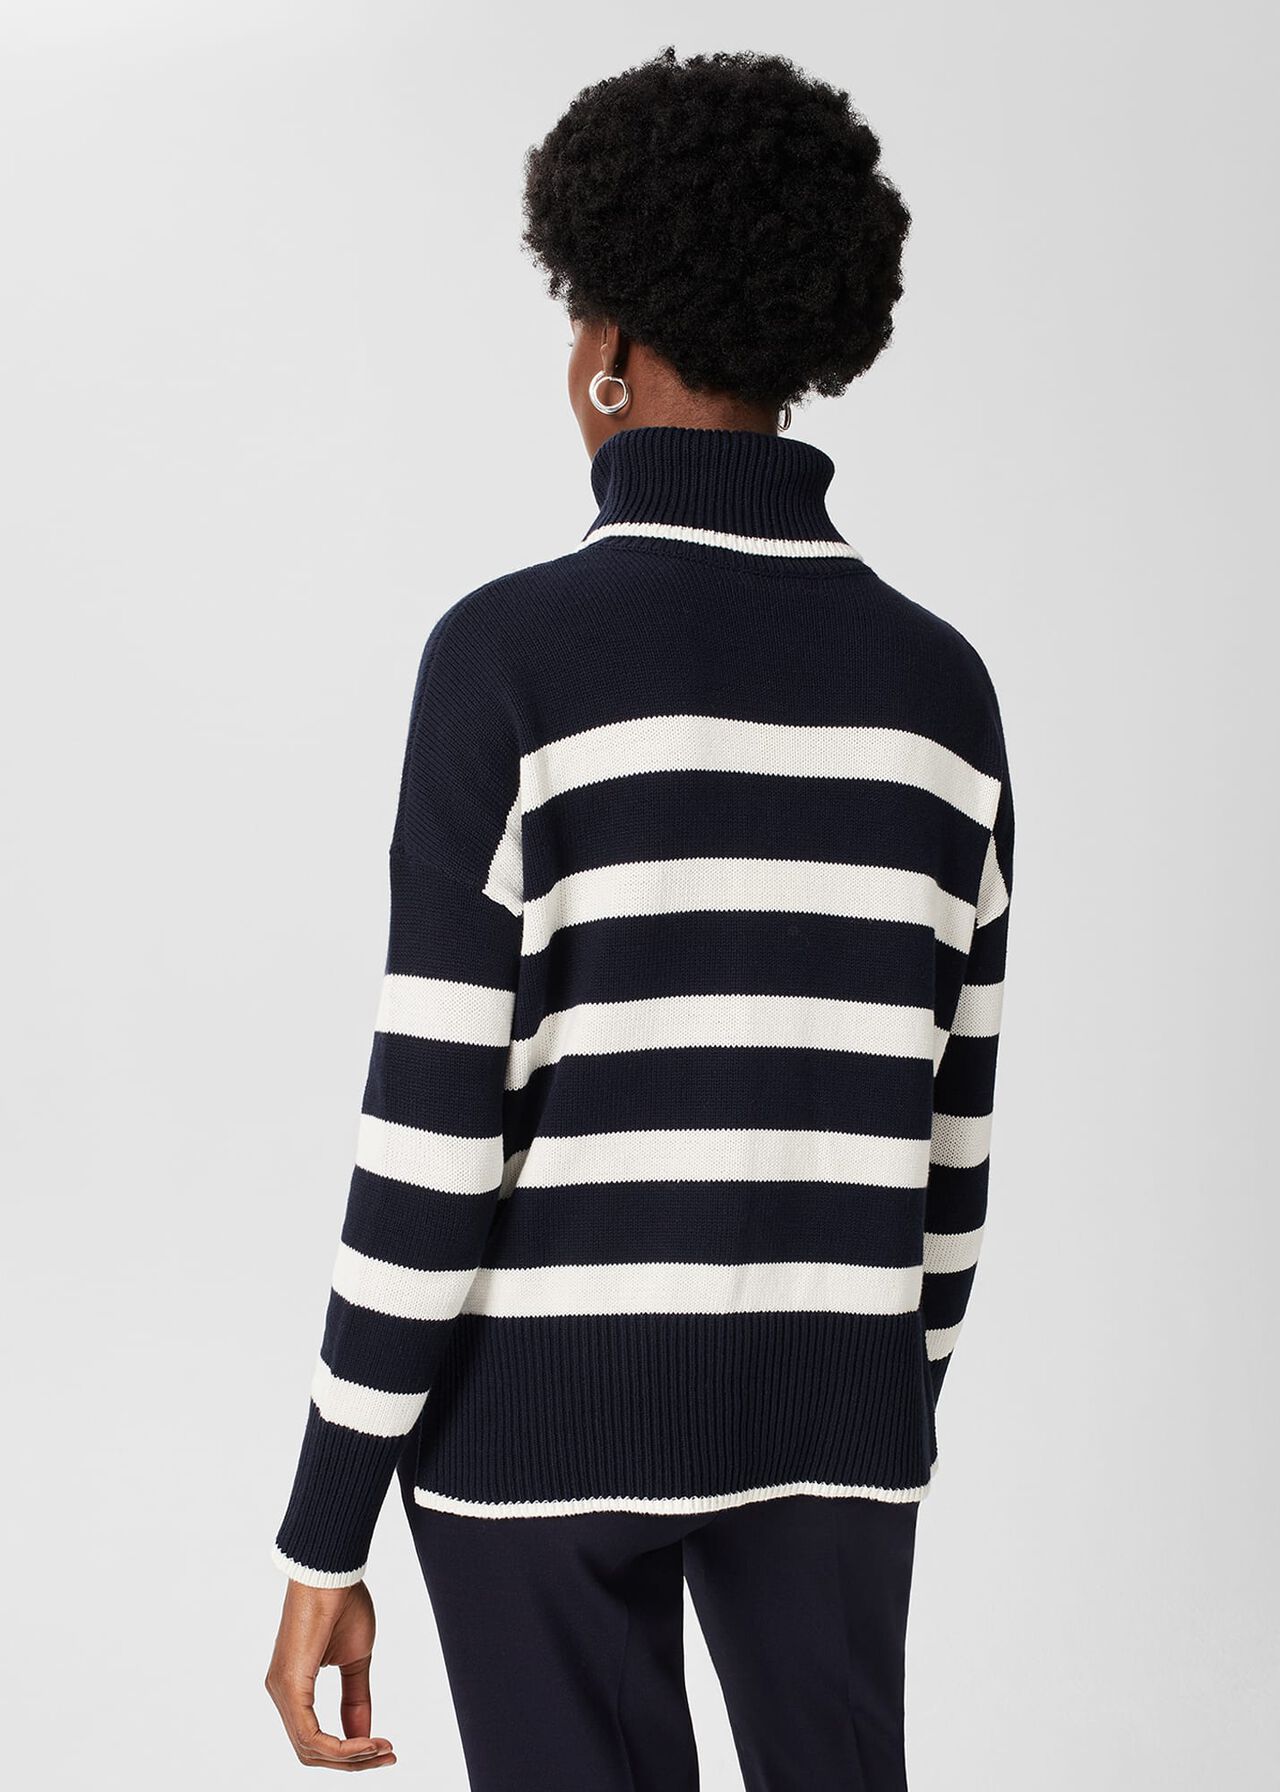 Marie Cotton Striped Jumper, Navy Ivory, hi-res